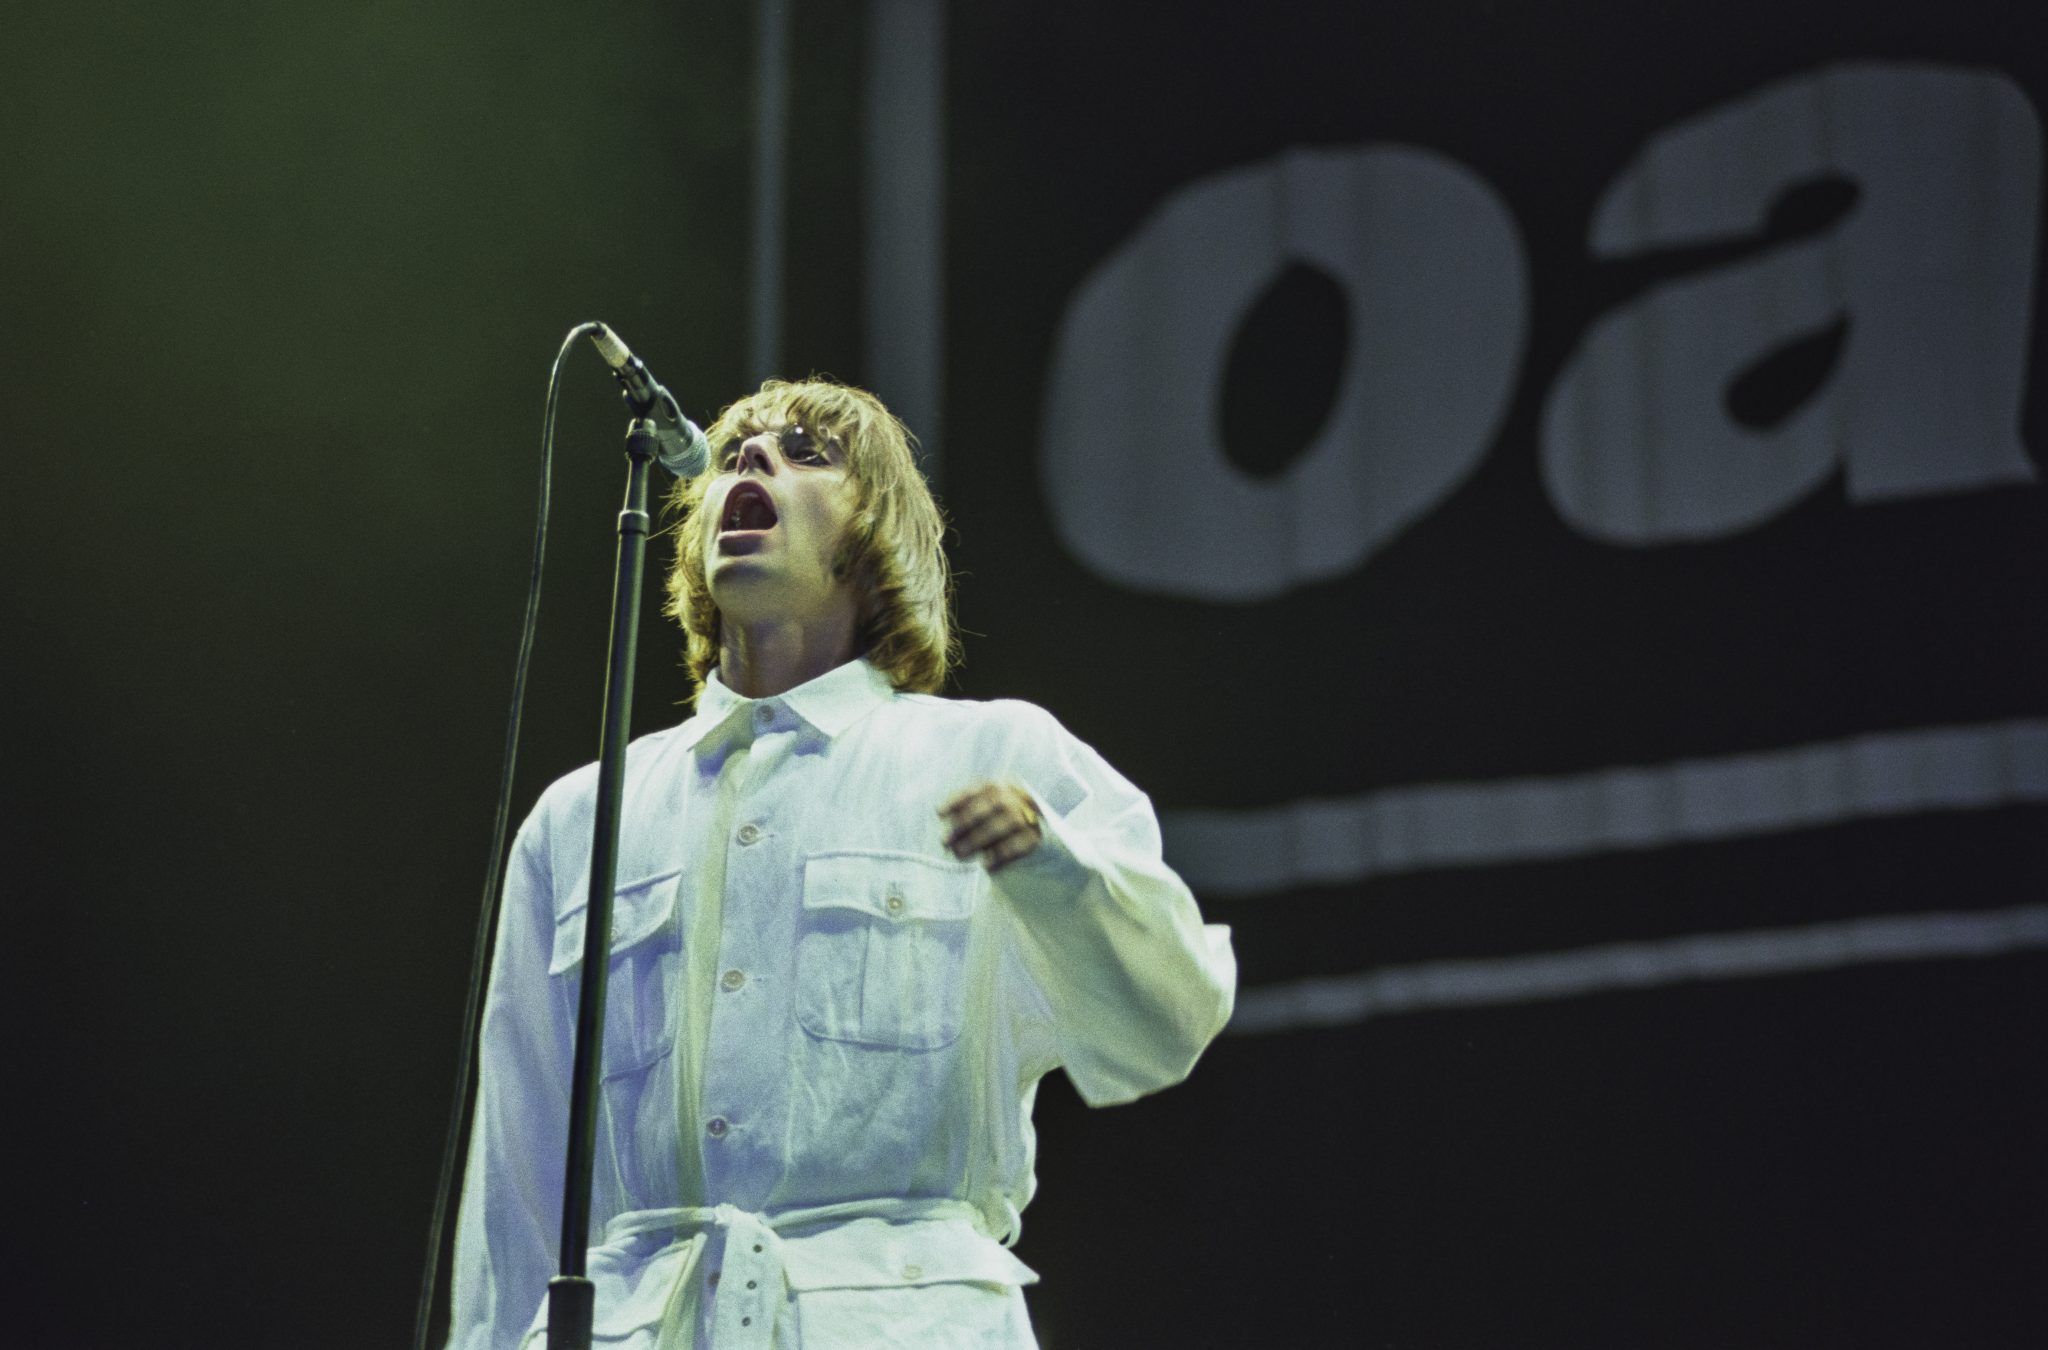 Singer Liam Gallagher performing with British rock group, Oasis, at Knebworth House, Hertfordshire, 10th August 1996. (Photo by Brian Rasic/Hulton Archive/Getty Images)